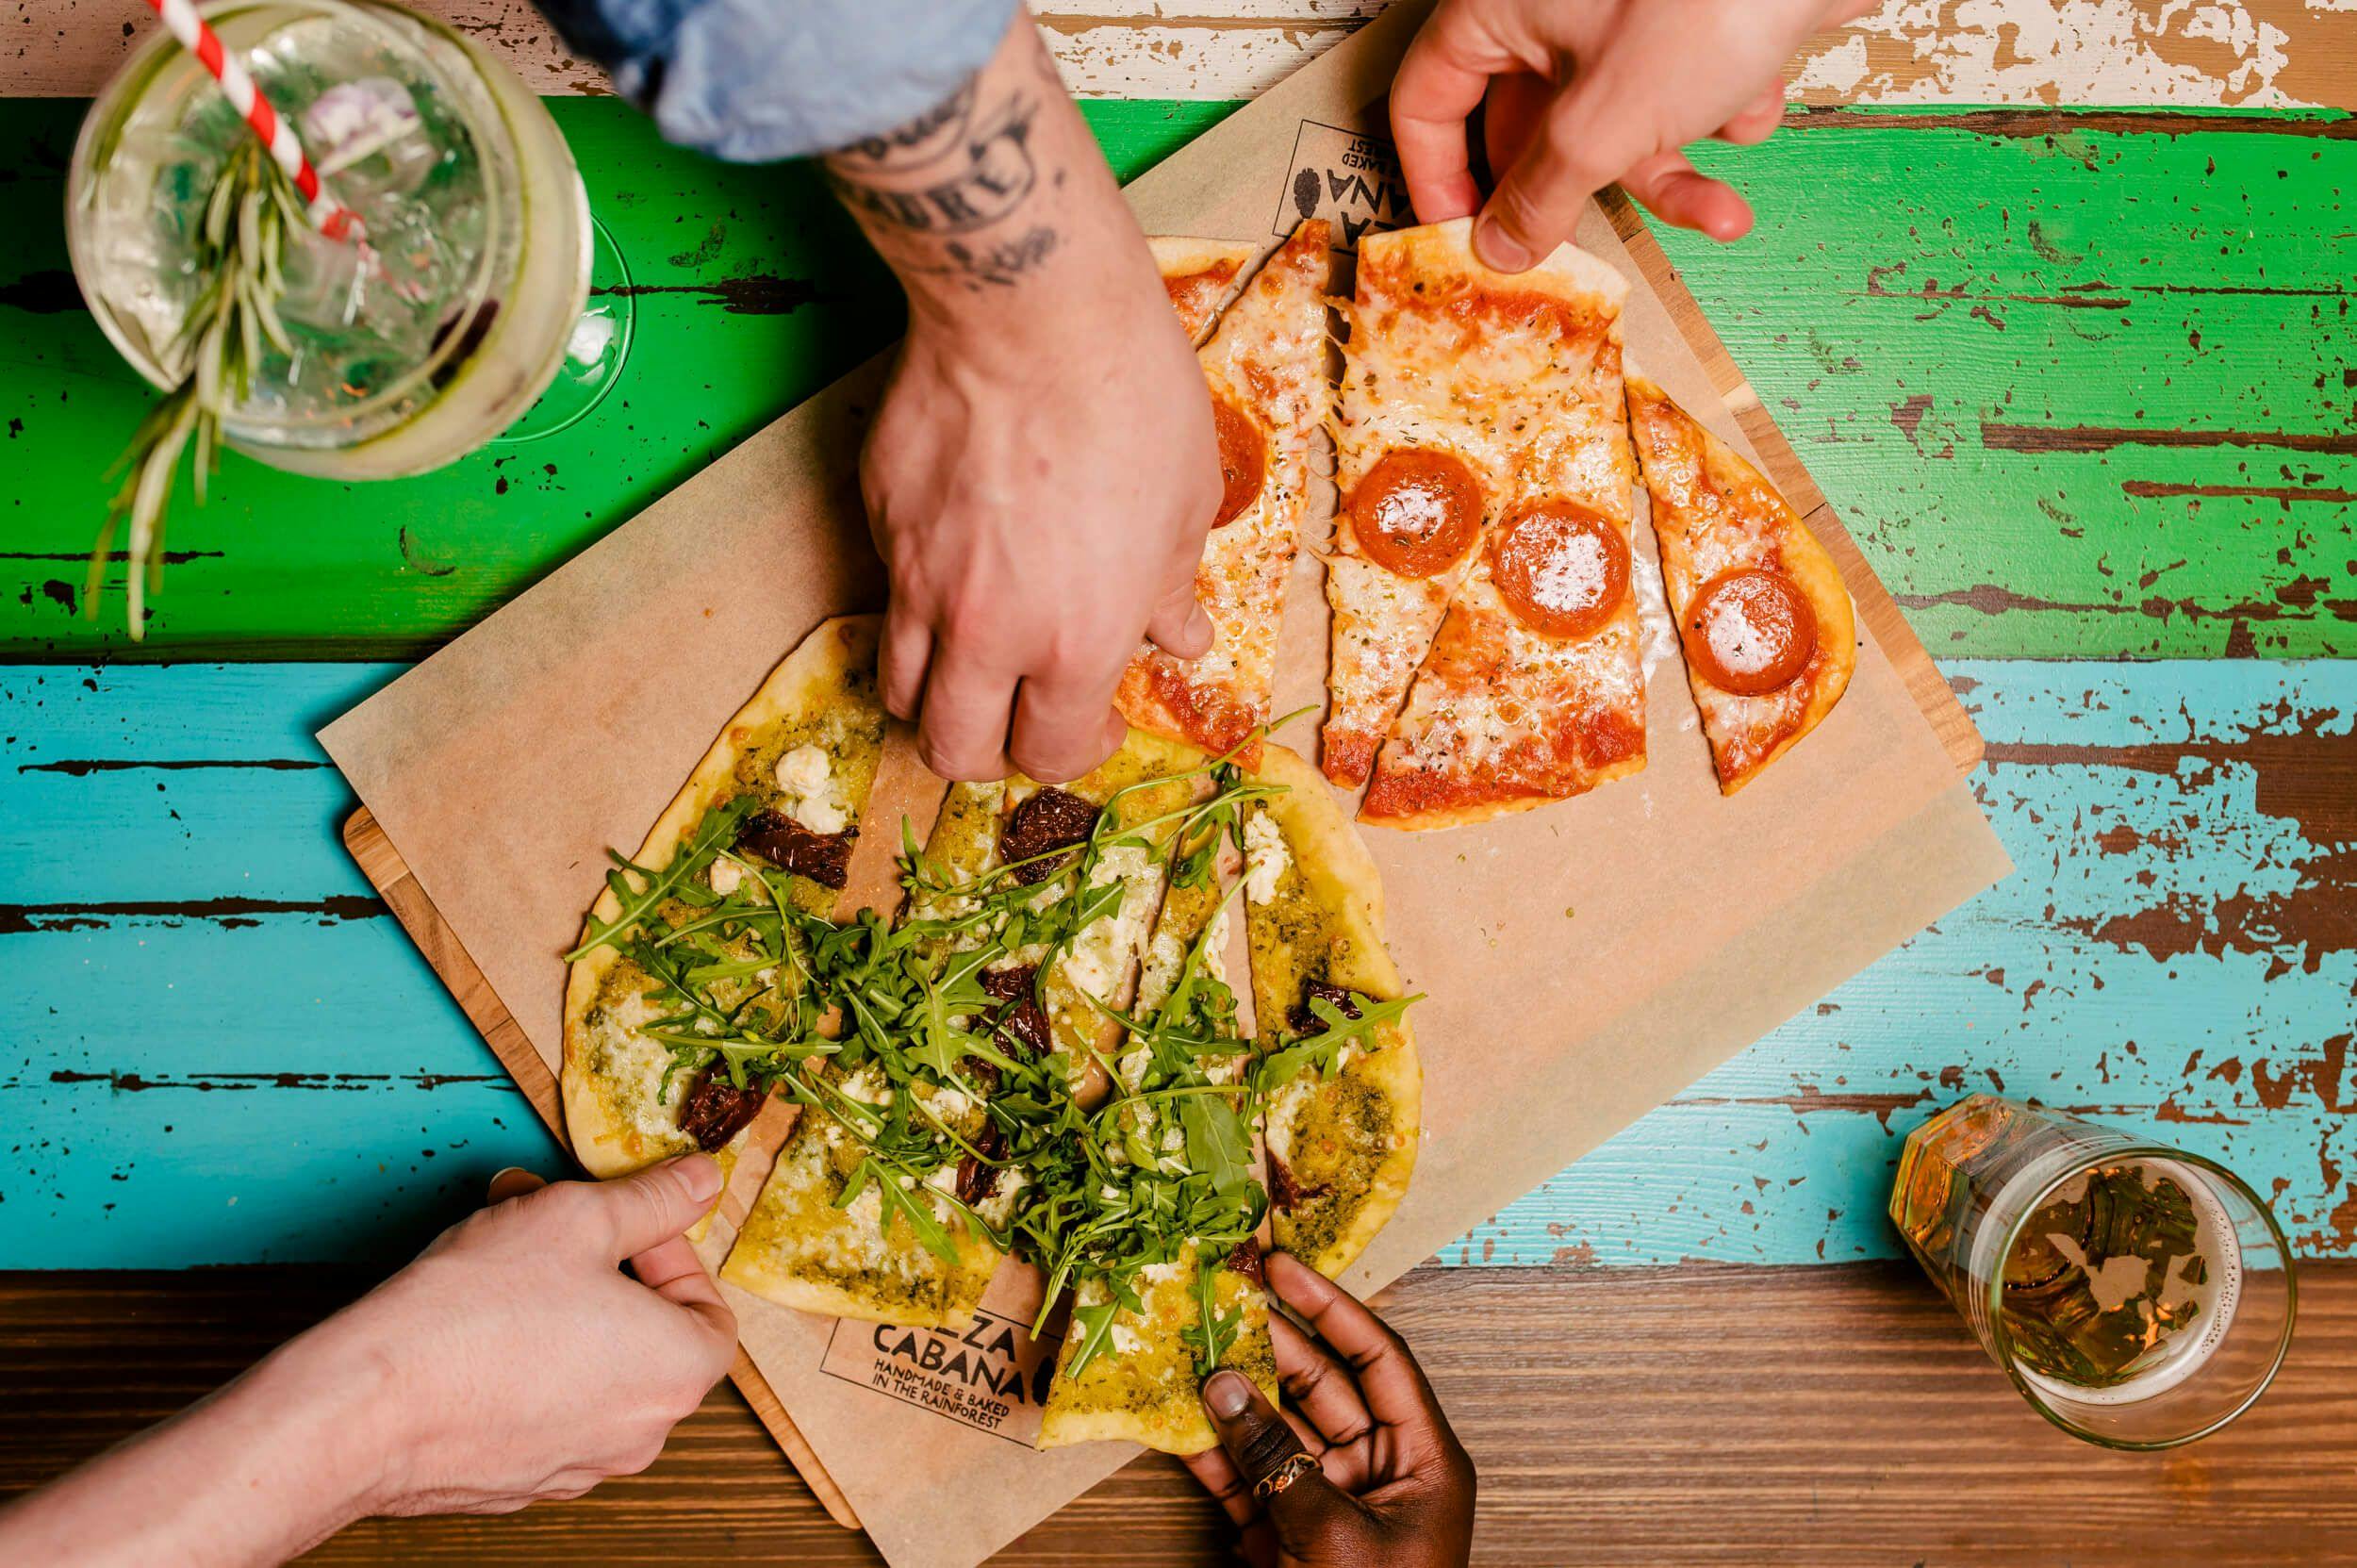 A birds-eye-view of a striped blue, brown and green table with two Pizza Cabana wonky, oval pizzas in the centre being enjoyed by two people.